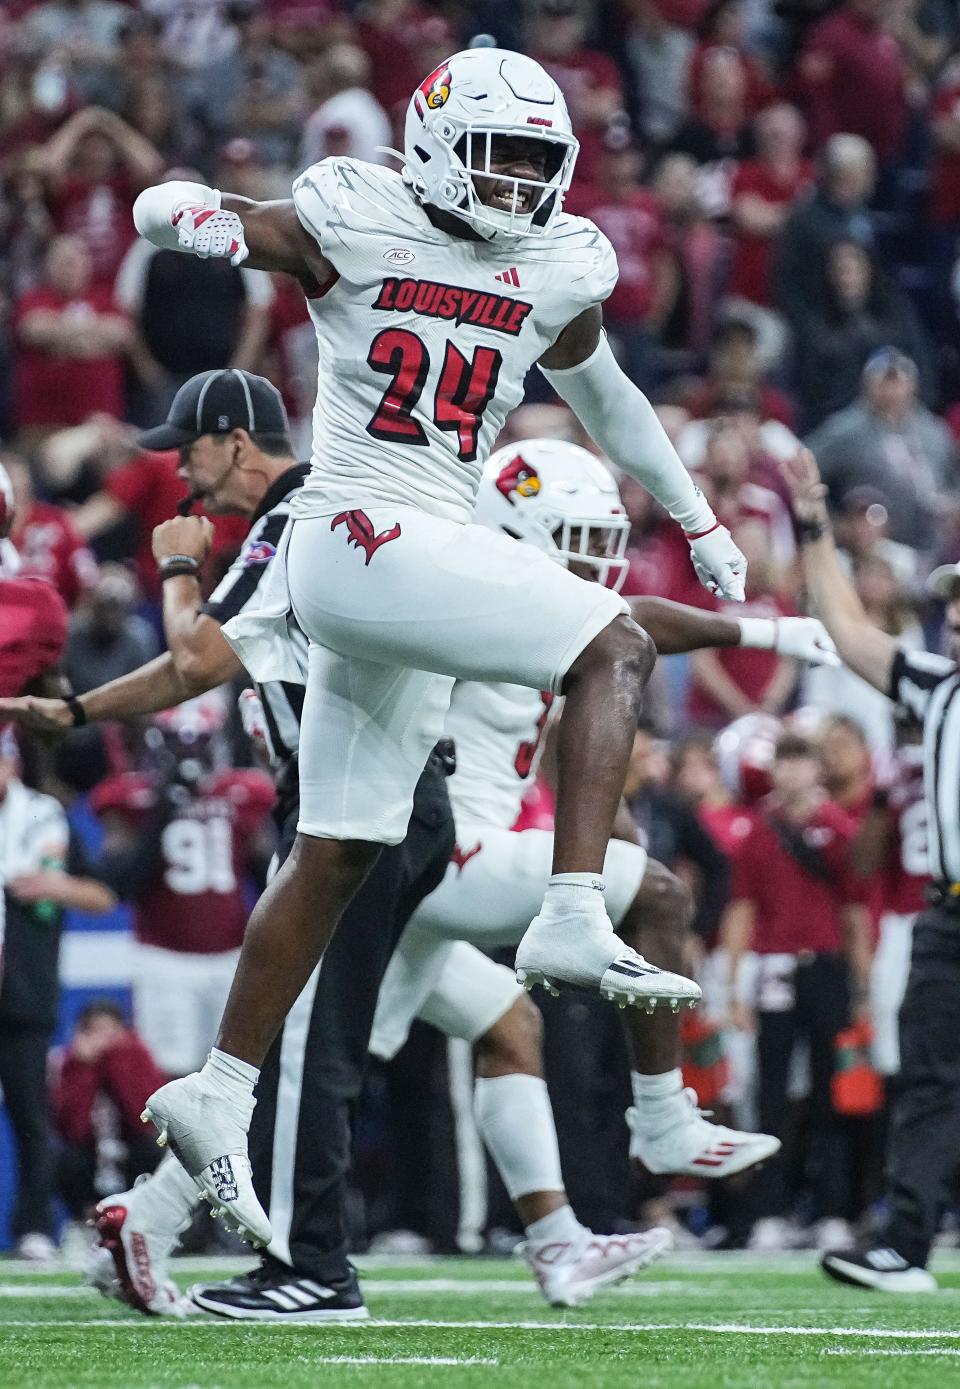 Louisville linebacker Jaylin Alderman and his teammates will try to rebound from their loss to Pitt when the Cardinals host Duke on Saturday.